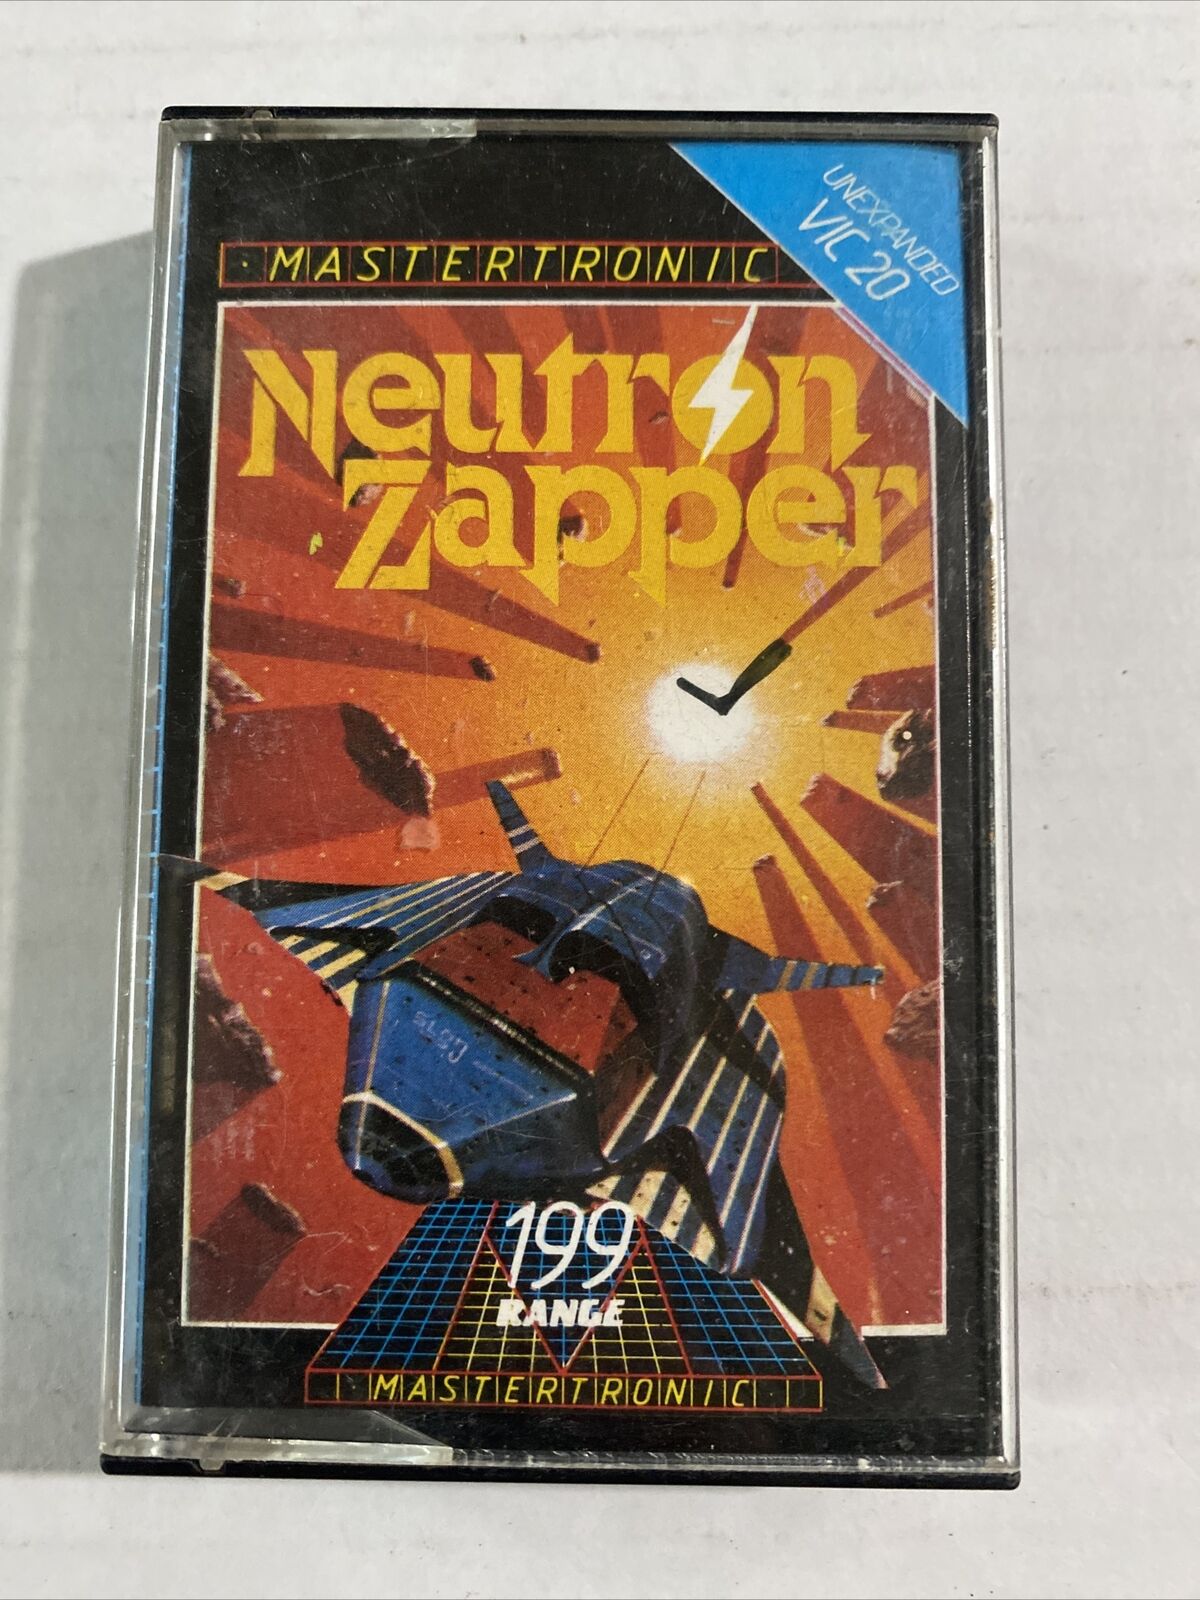 Commodore VIC-20 Neutron Zapper - Cassette Game By Mastertronic  1984